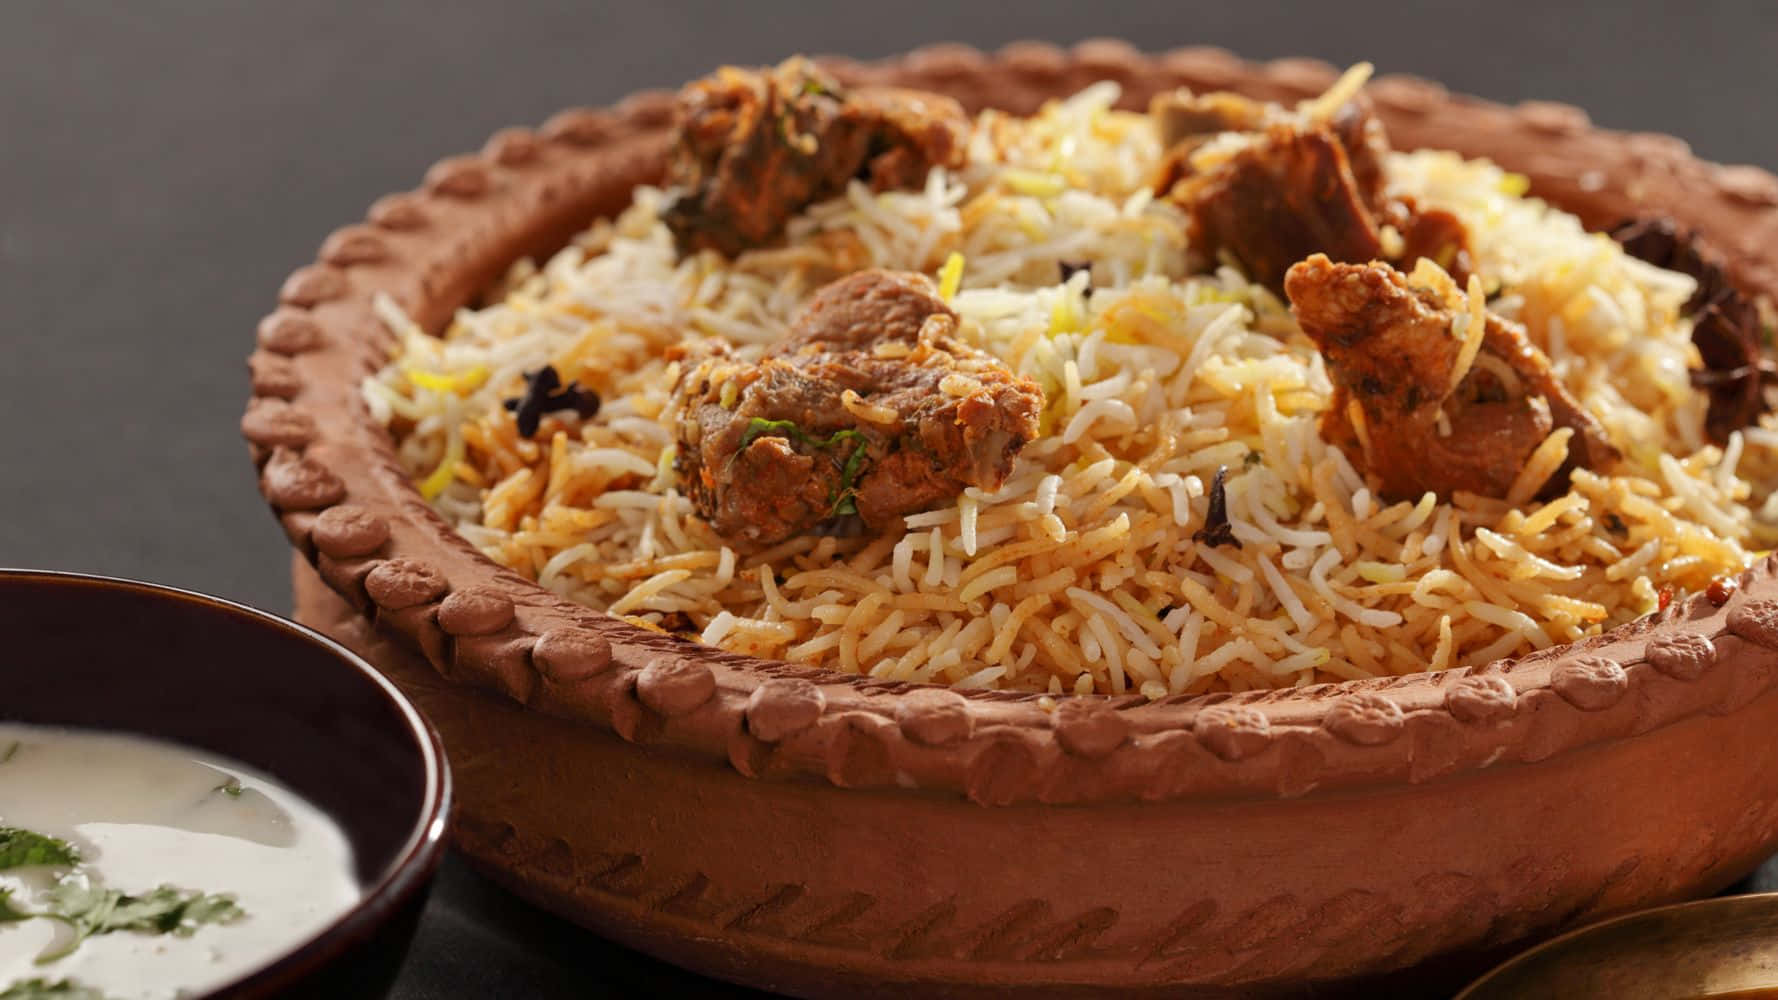 Delicious and colorful Biryani ready to be served